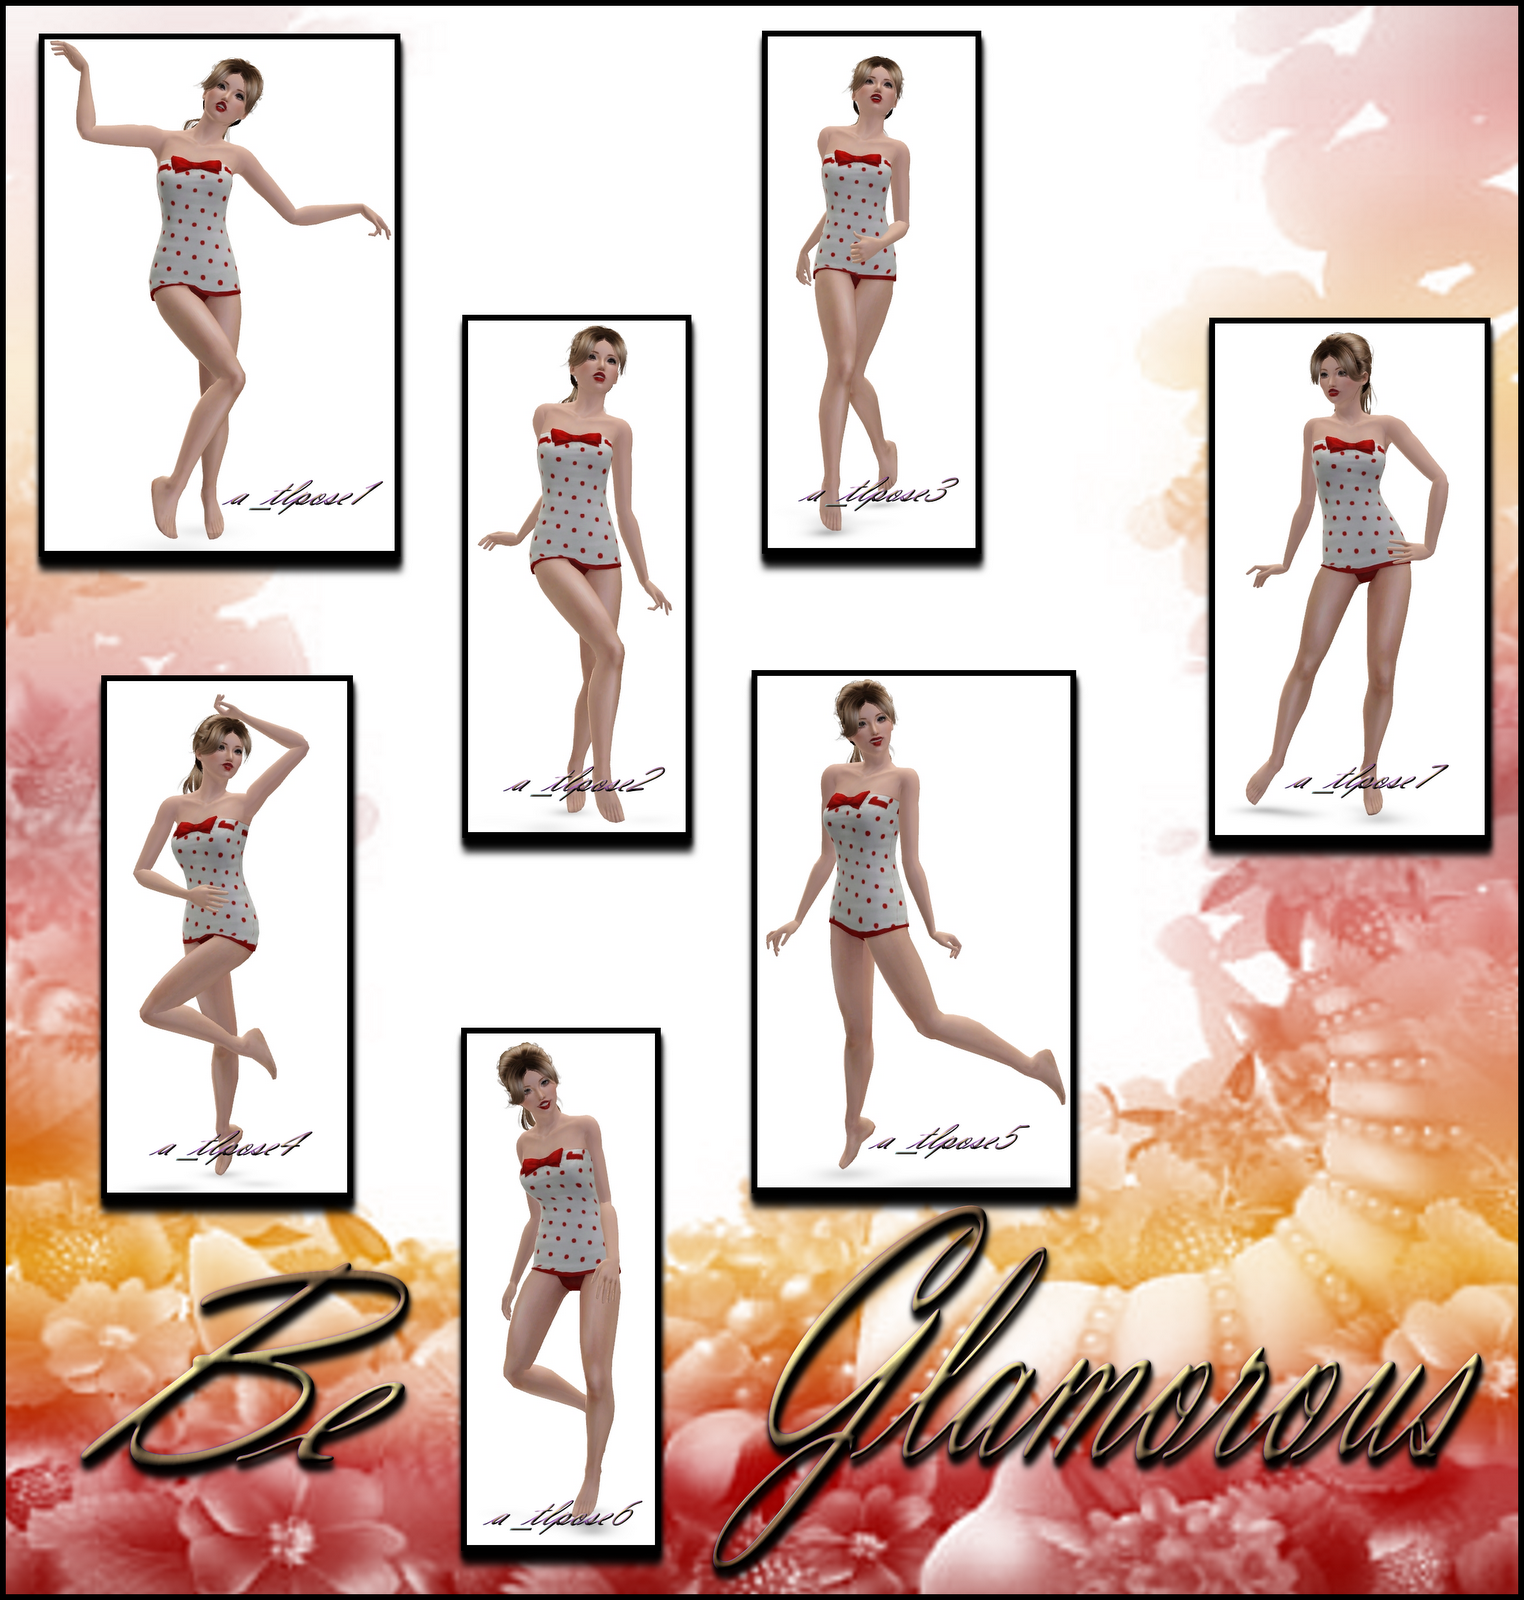 TattooedLioness Be Glamorous Pose Pack by Tattooed Lioness